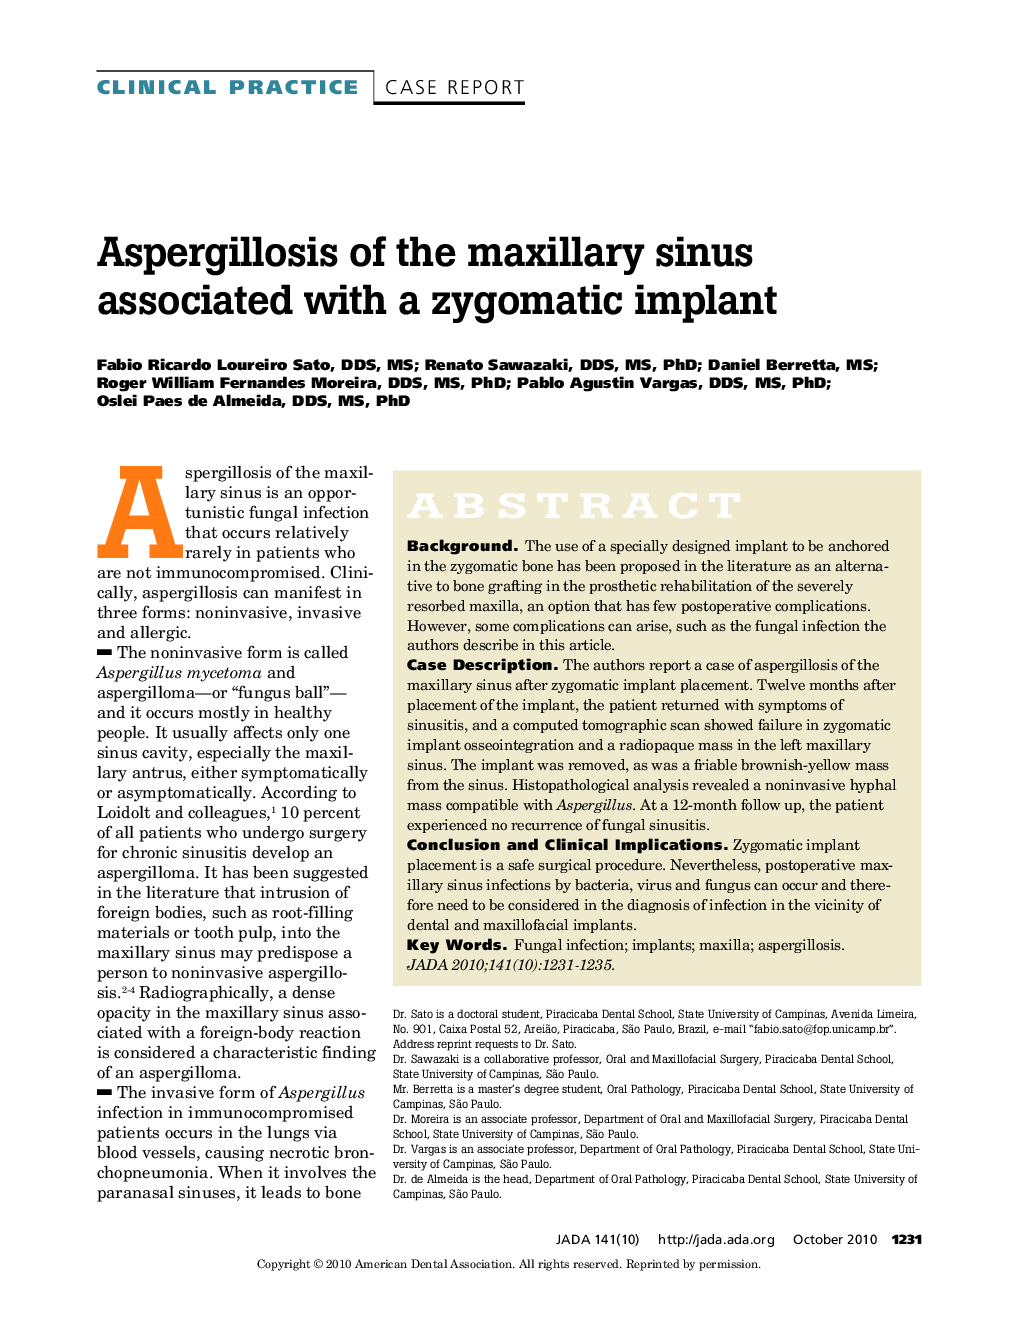 Aspergillosis of the Maxillary Sinus Associated With a Zygomatic Implant